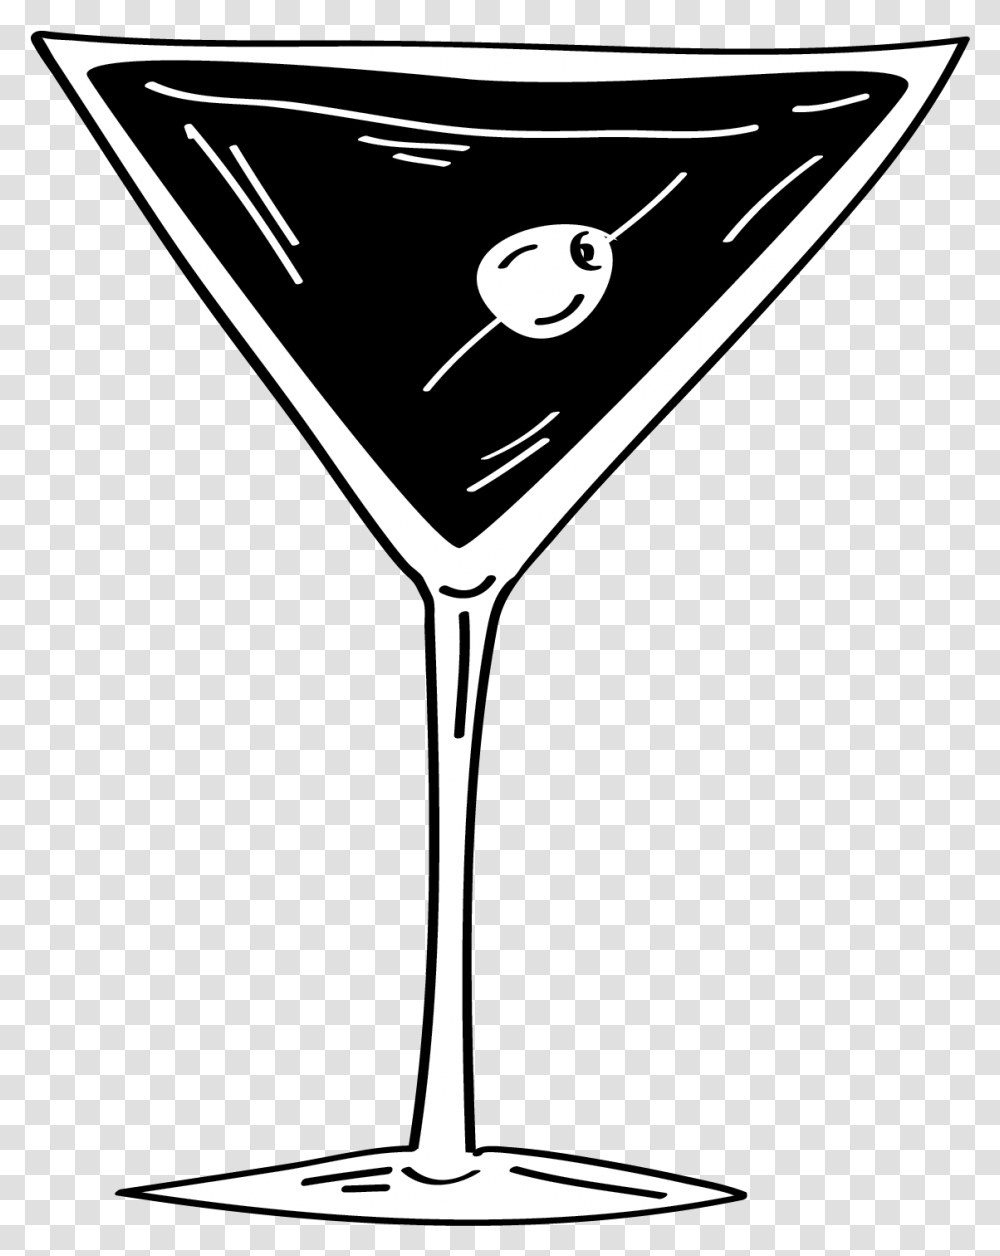 Martini Glass Martini Glass, Cocktail, Alcohol, Beverage, Drink Transparent Png